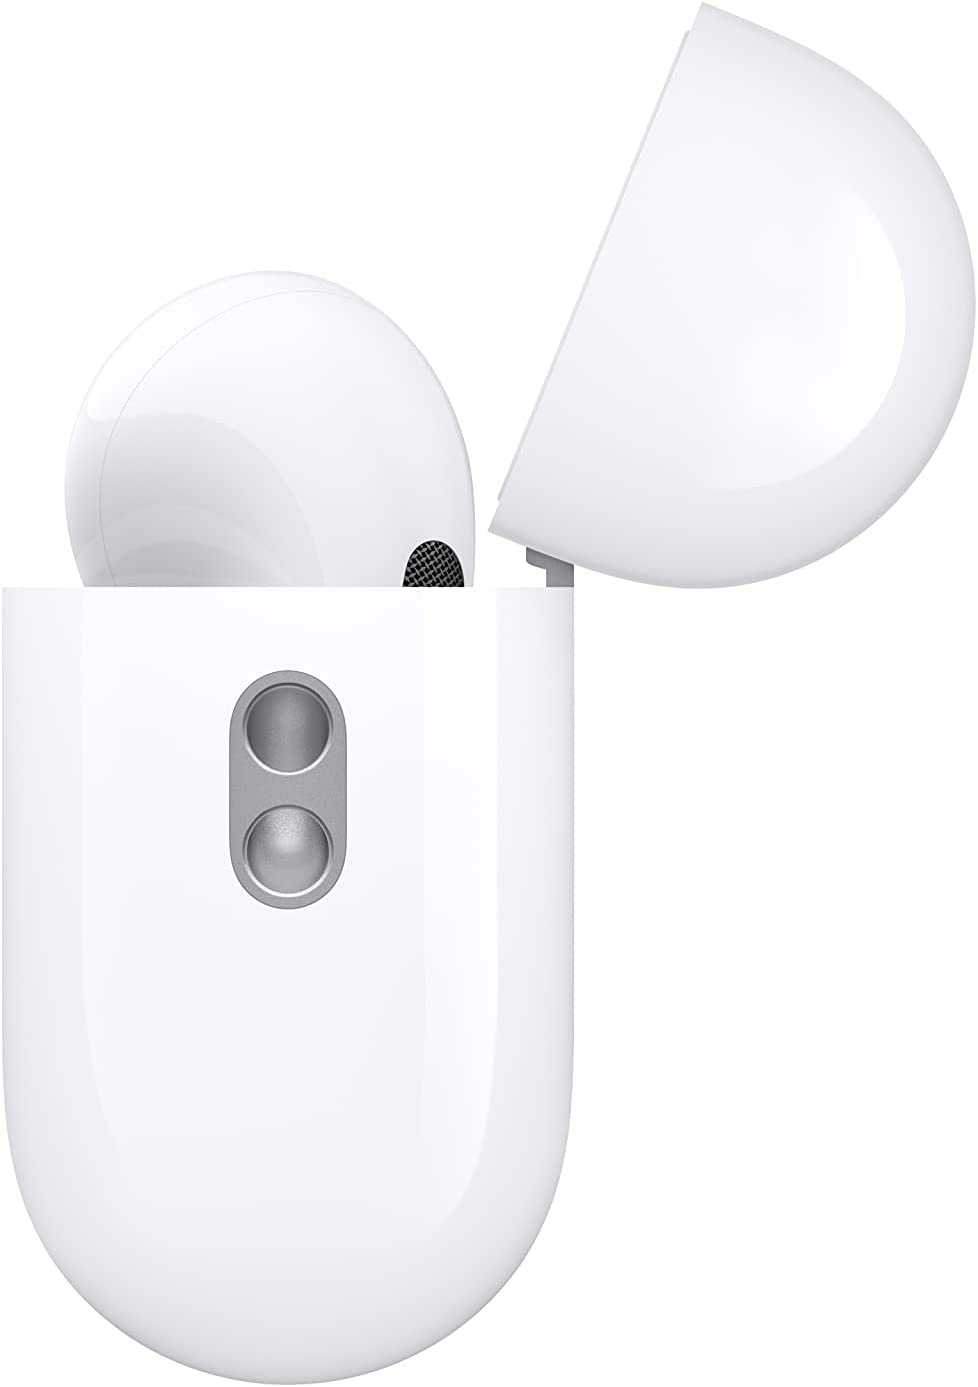 Apple AirPods Pro 2nd Generation Wireless Earbuds with MagSafe Charging Case (Renewed) - TJ Outlet